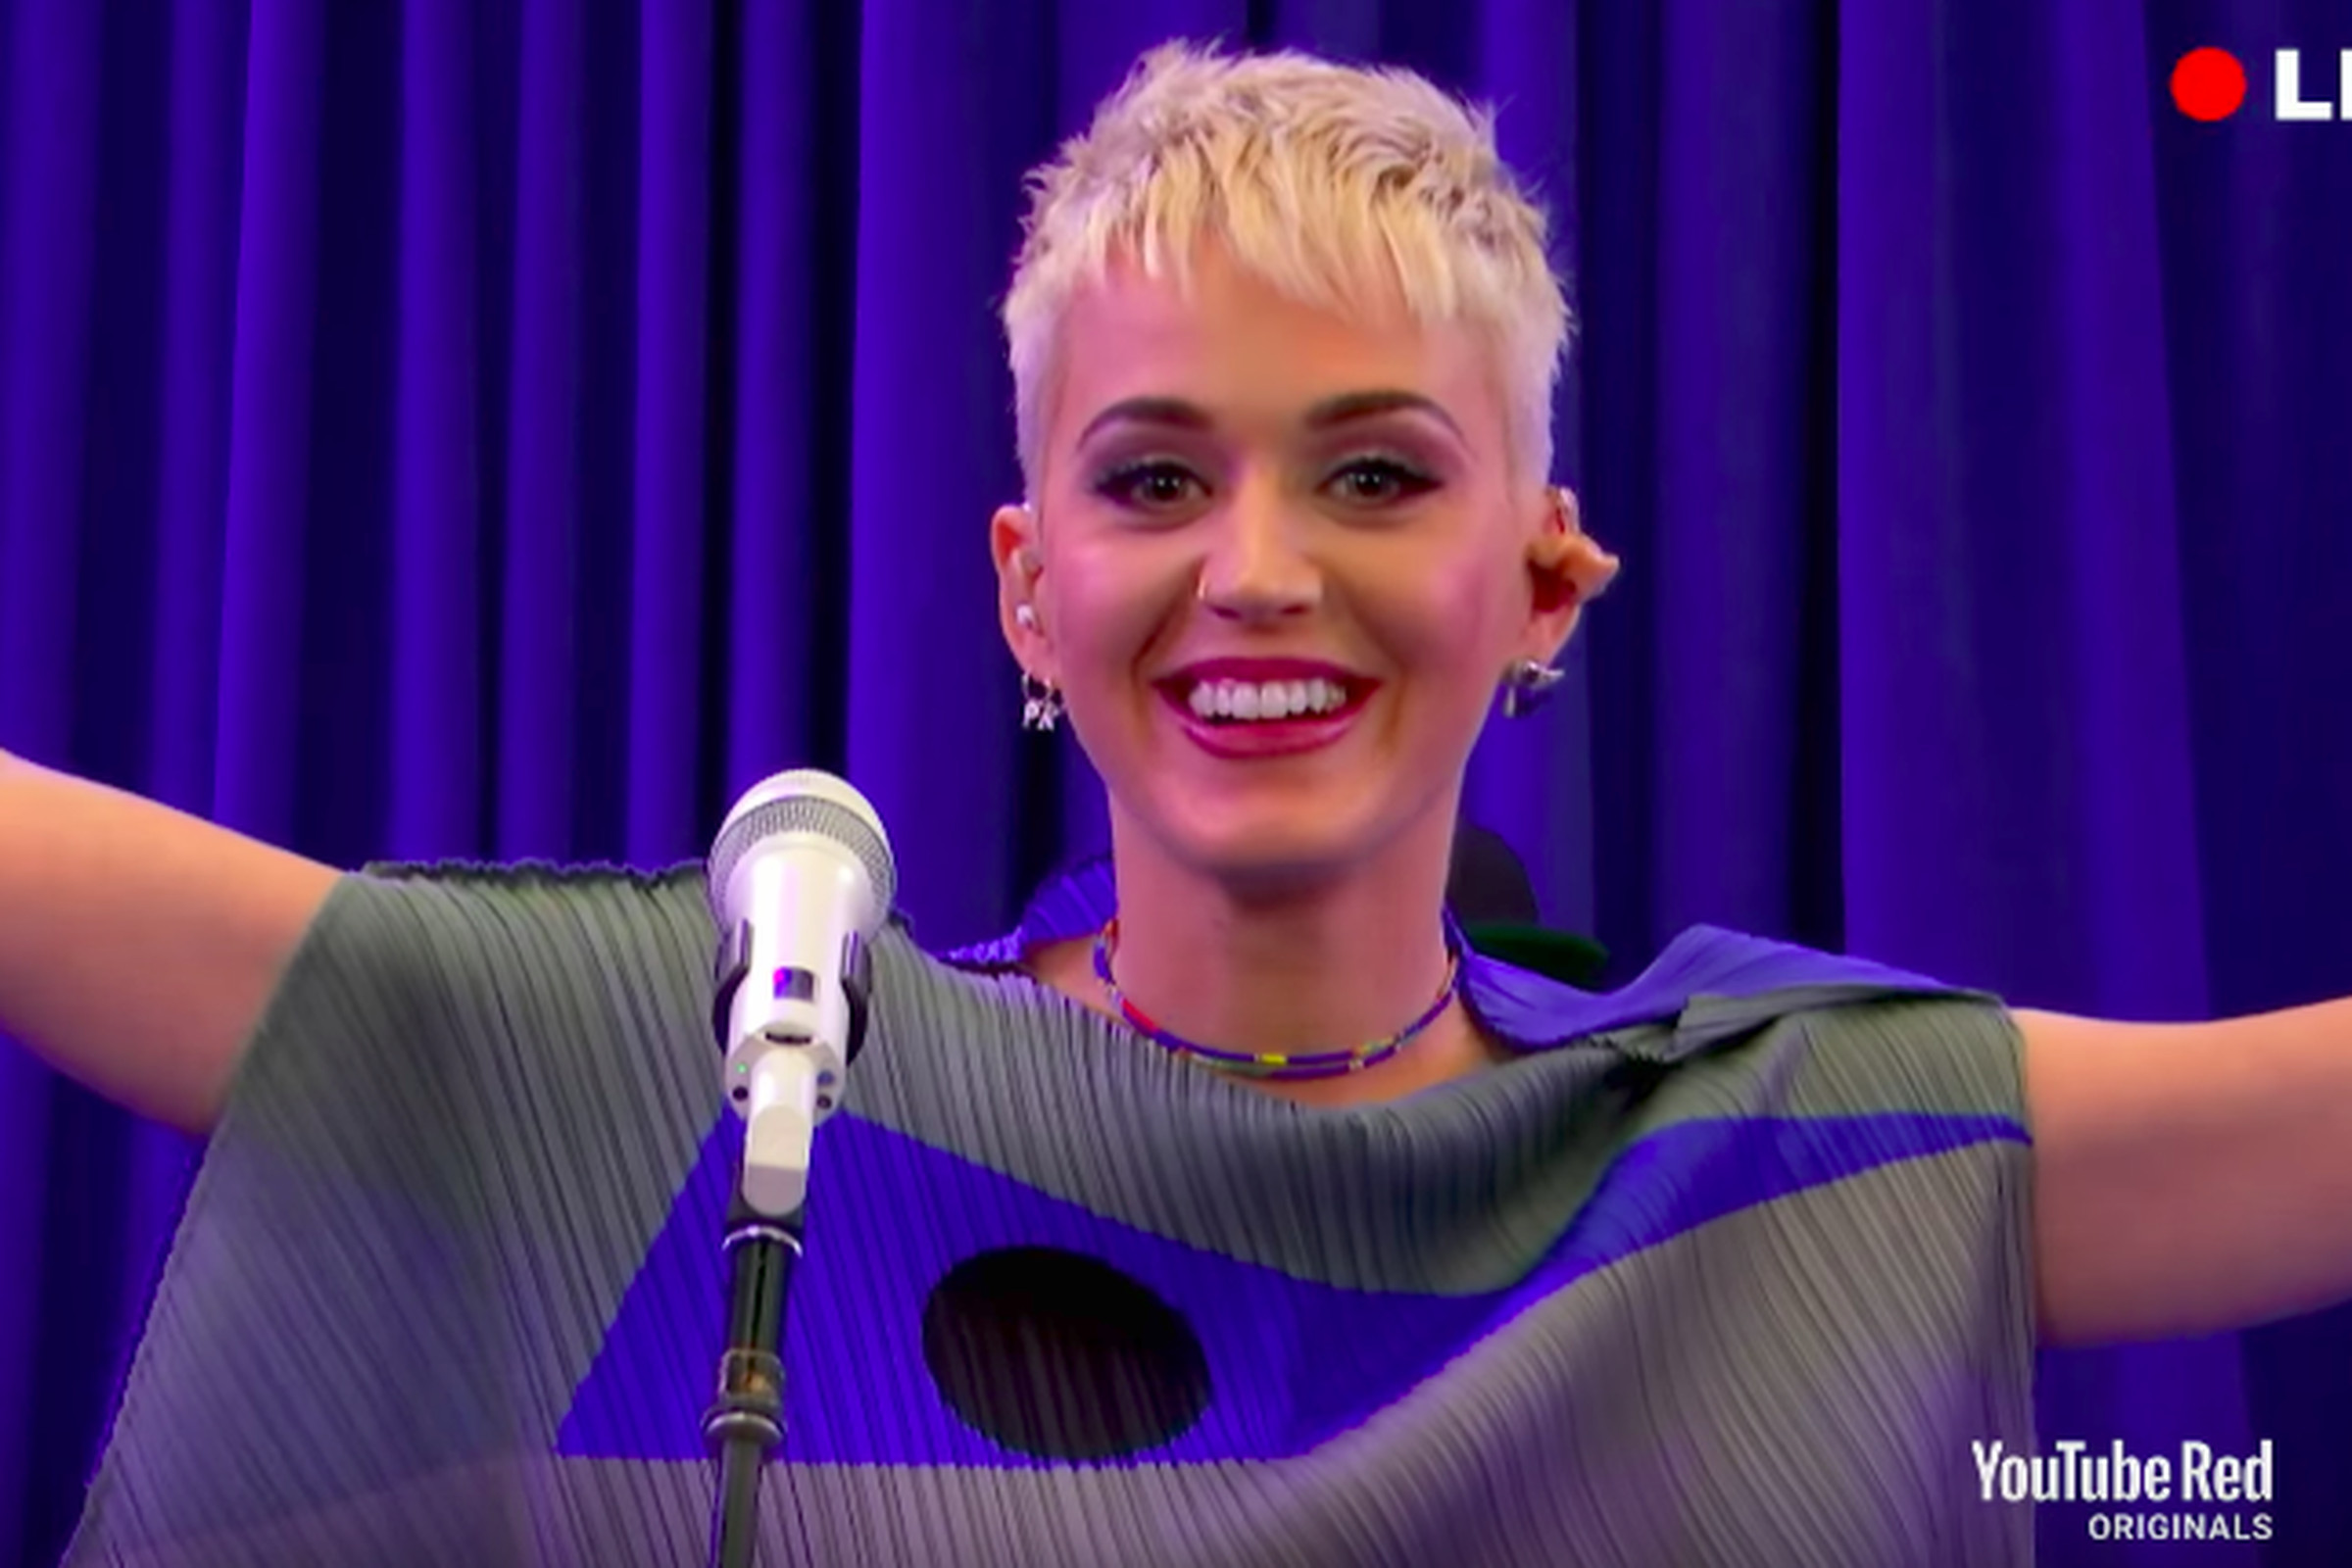 katy-perry-livestream-youtube-red